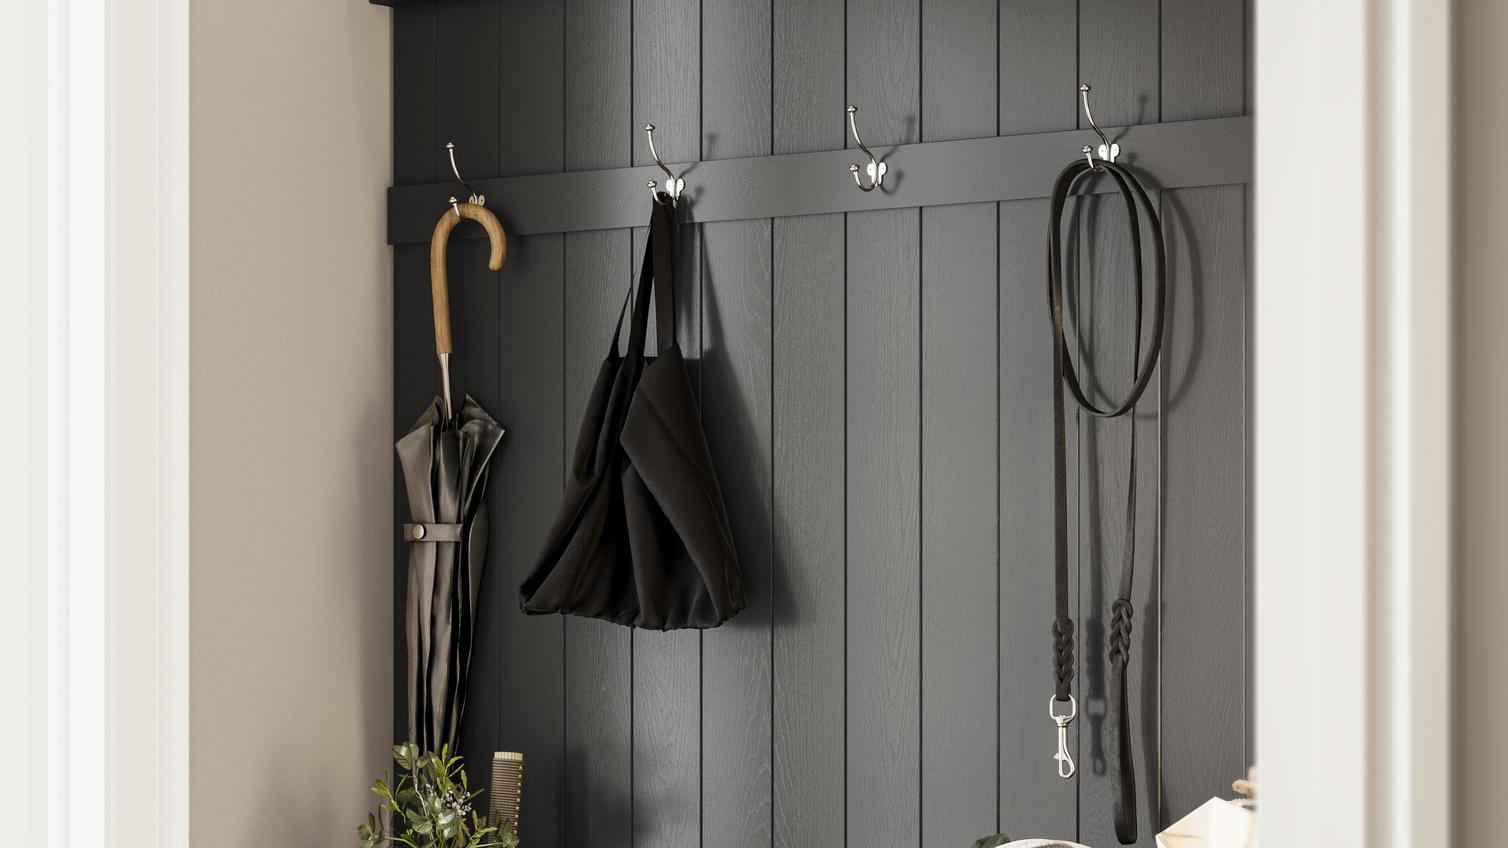 A utility room with hooks used to hang up a bag and umbrella, with a bench made from kitchen cabinets.